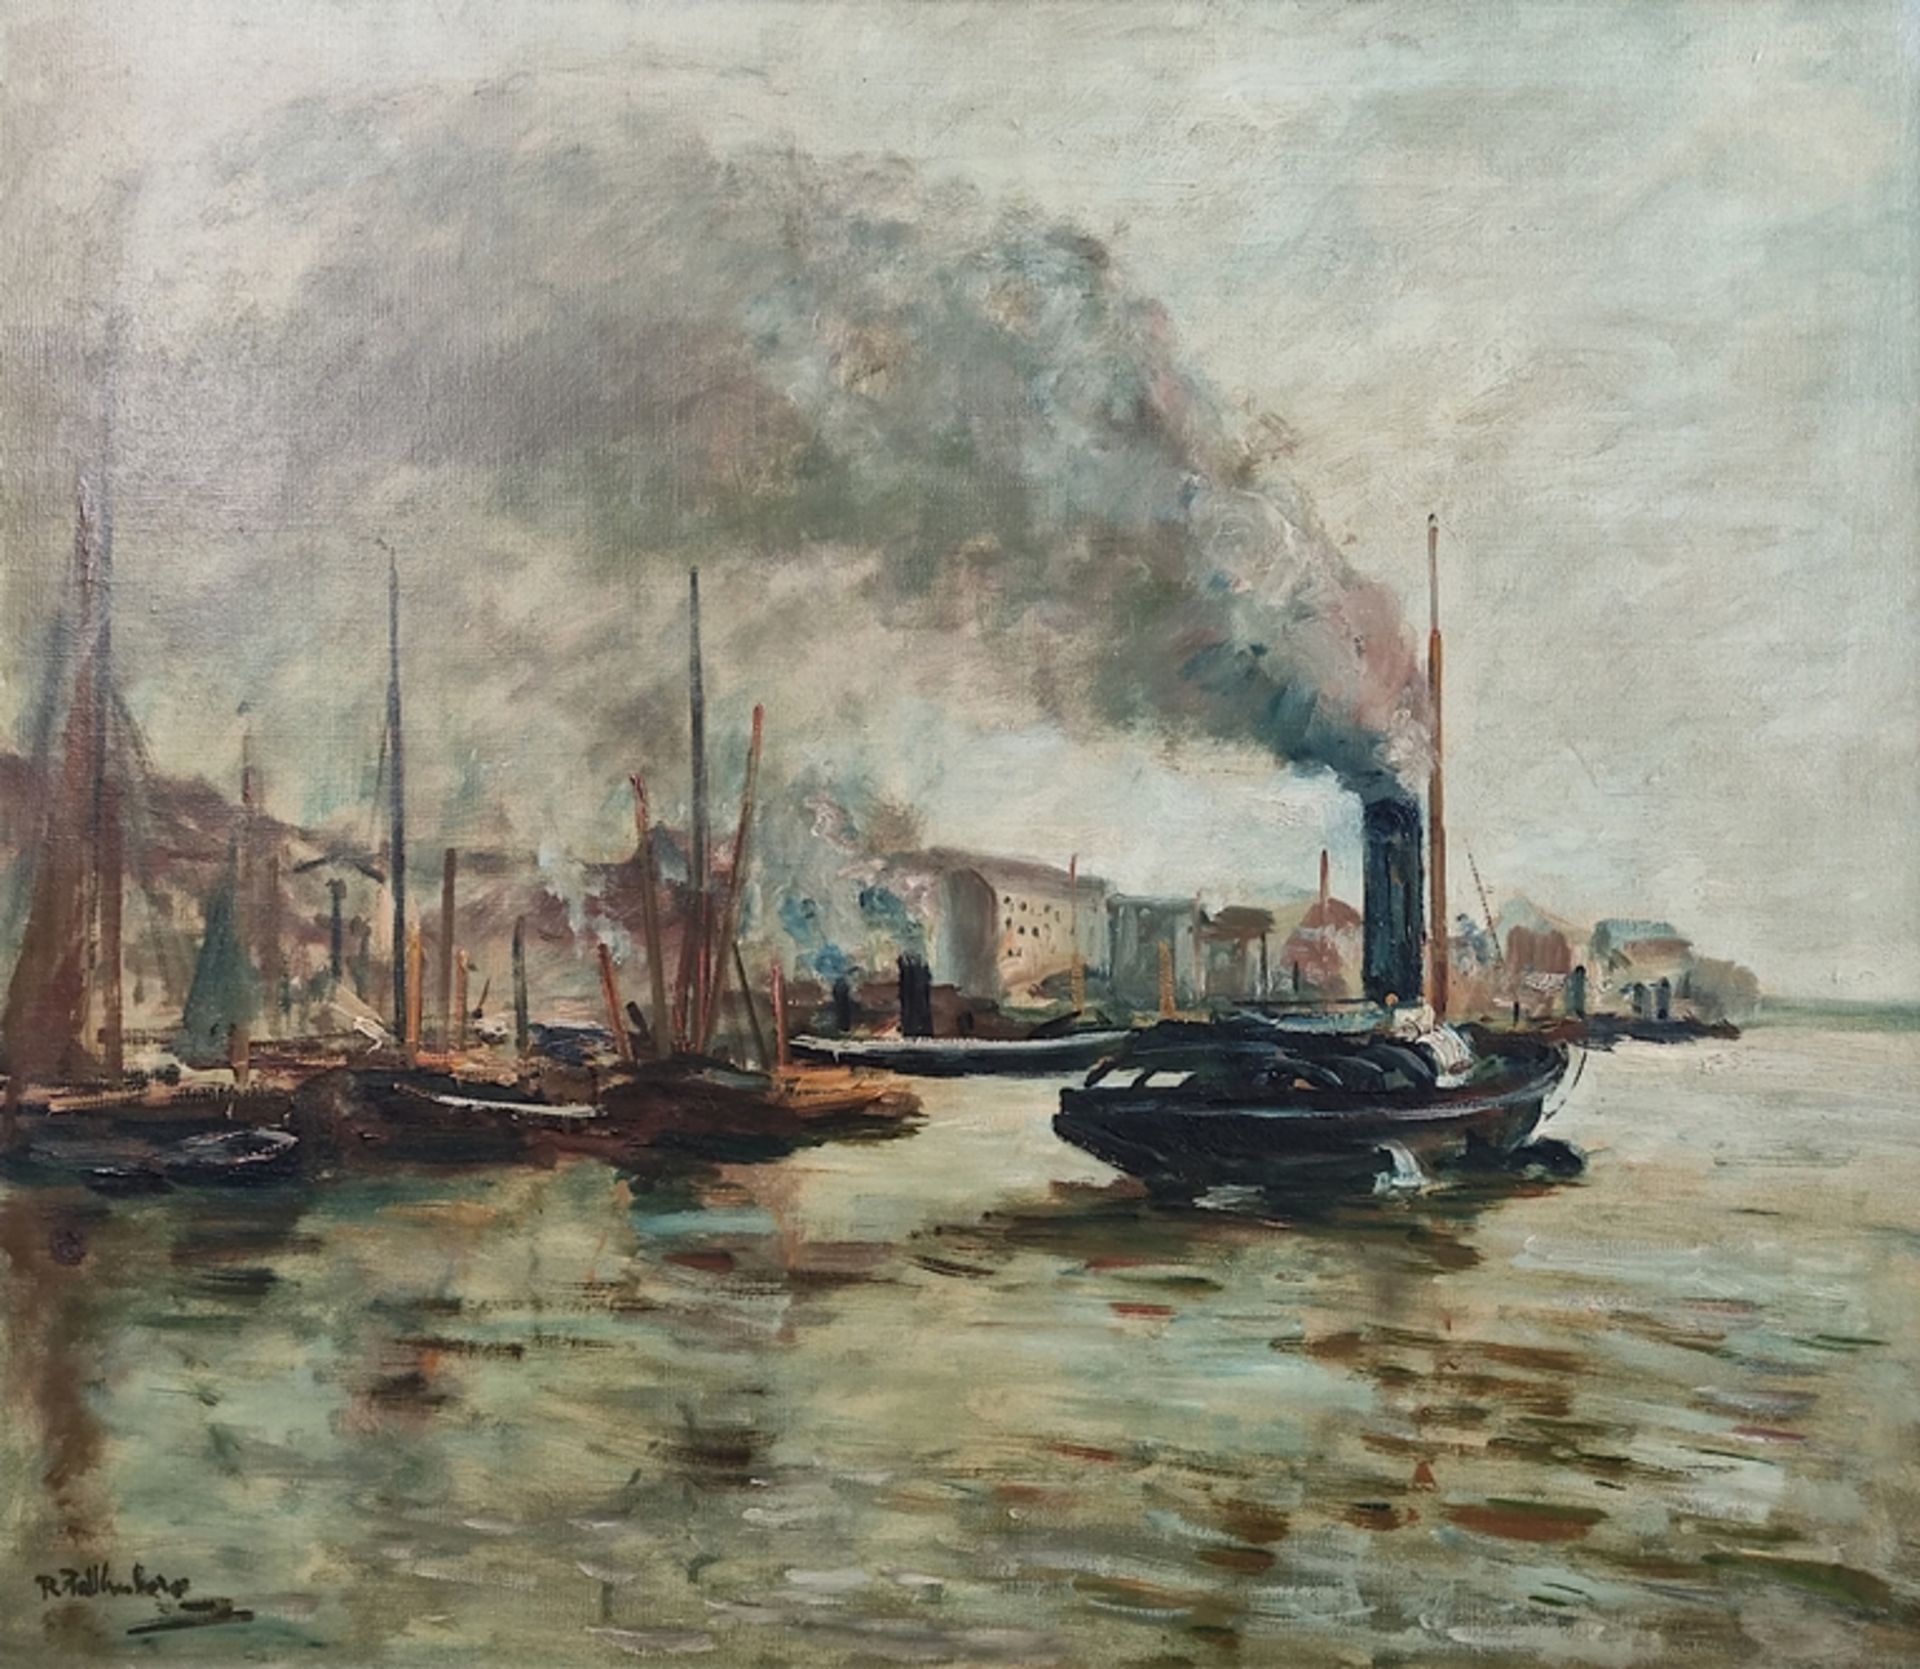 Falkenberg, Richard (1875 - 1945) "Steamboat in the Harbour", oil on canvas, signed on the lower le